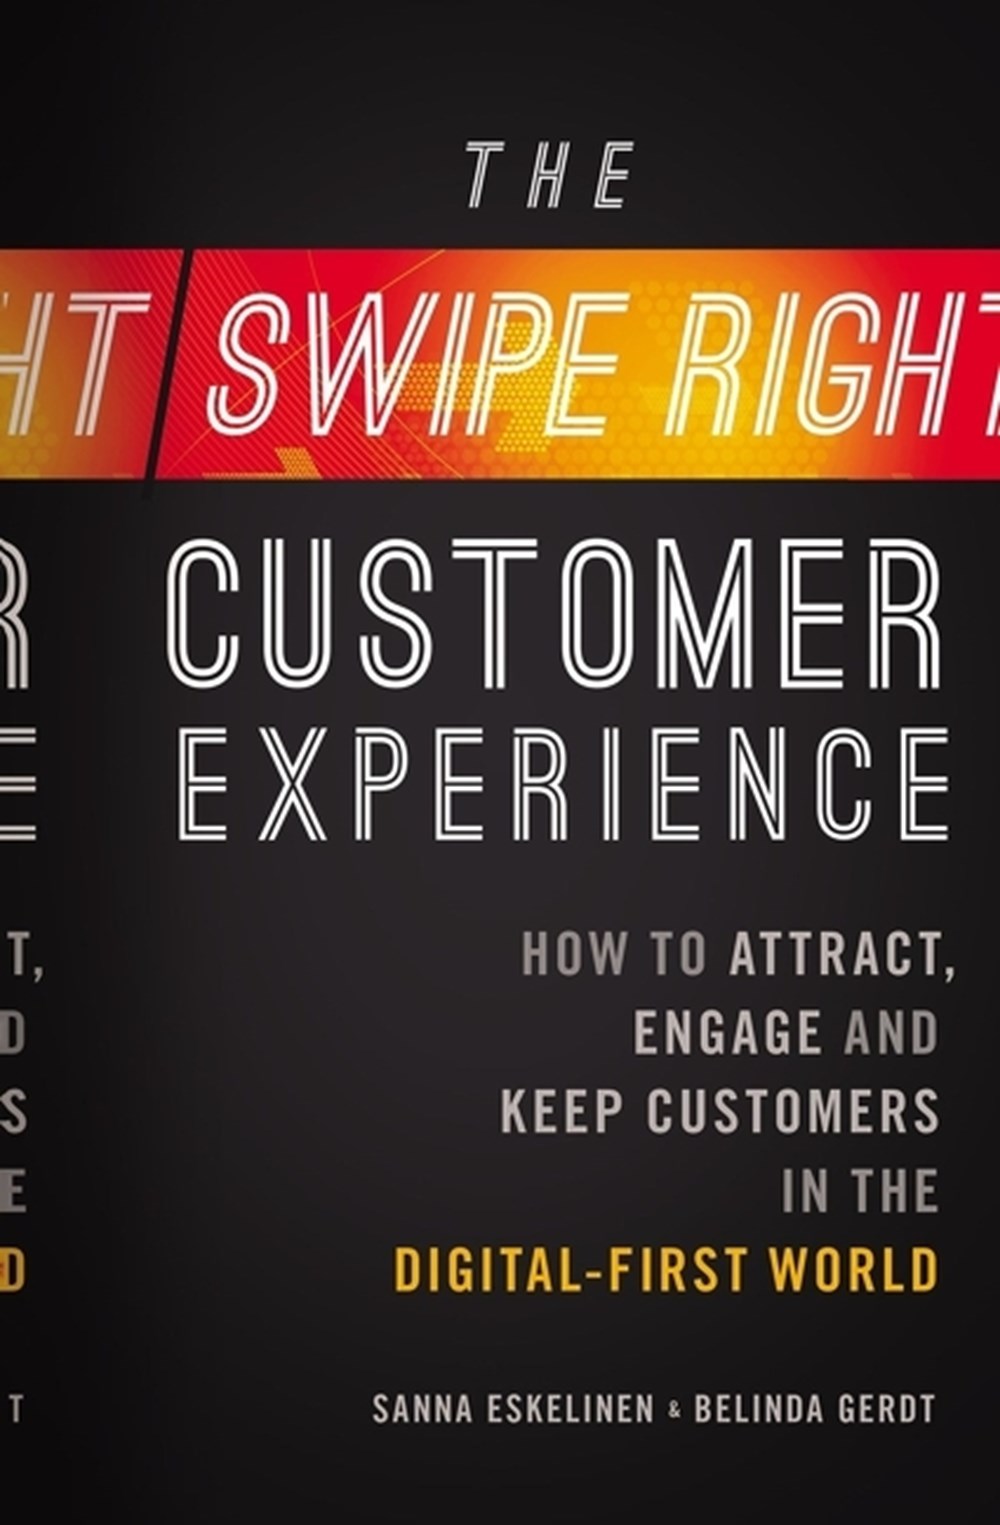 Swipe-Right Customer Experience: How to Attract, Engage, and Keep Customers in the Digital-First Wor